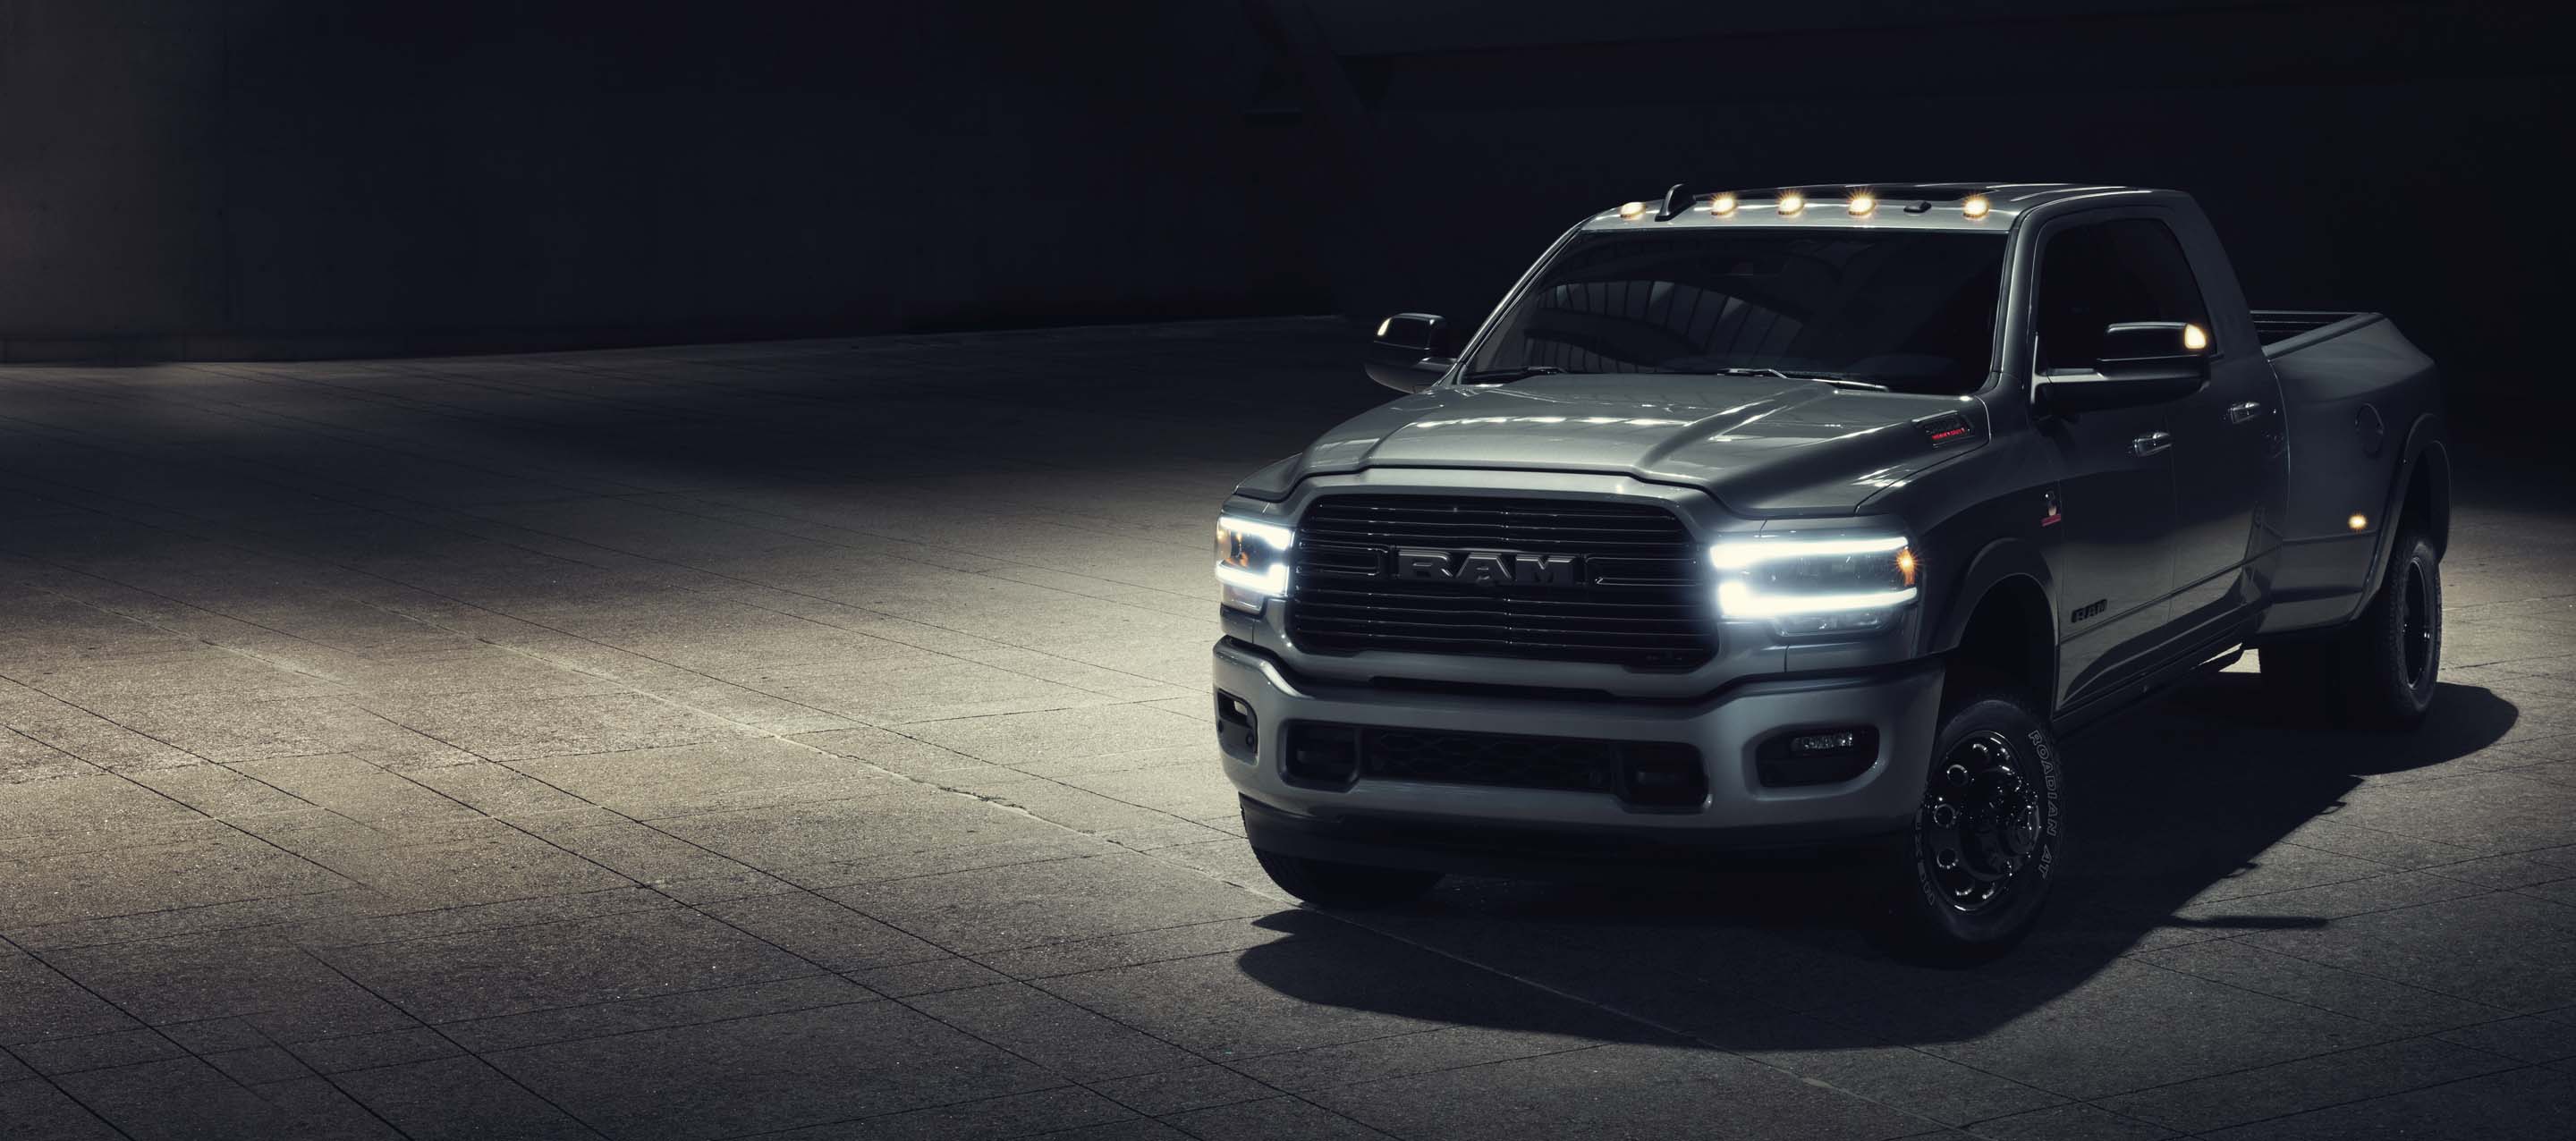 A three-quarter front view of a 2022 Ram 3500 Laramie Mega Cab in a darkened building with its exterior lights on.